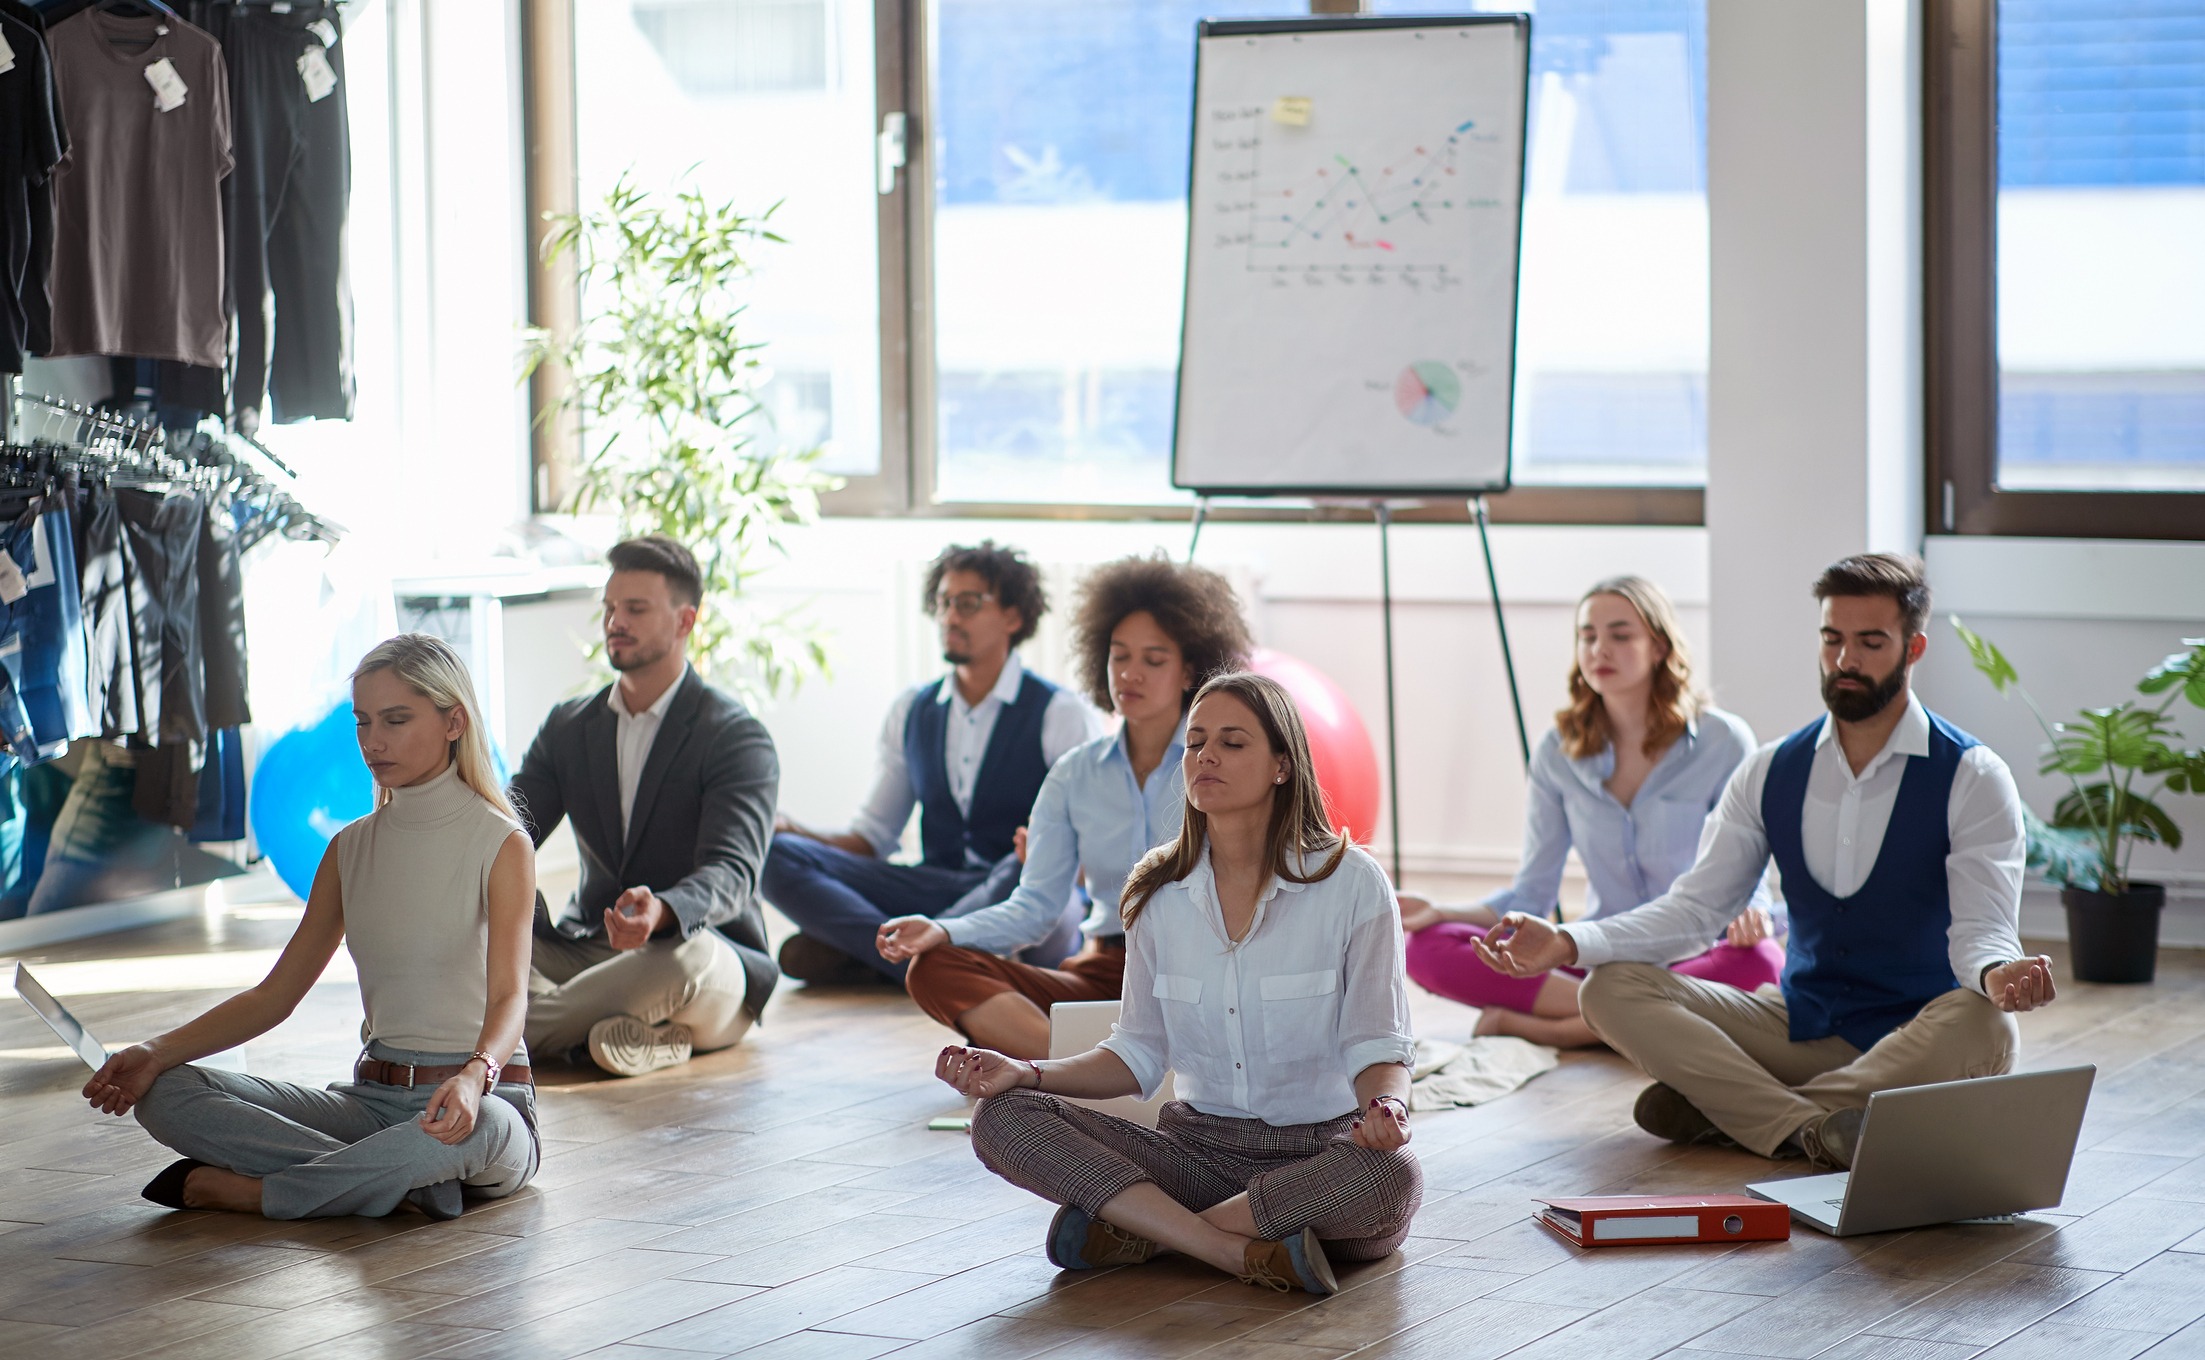 Business people practicing wellness through group meditation